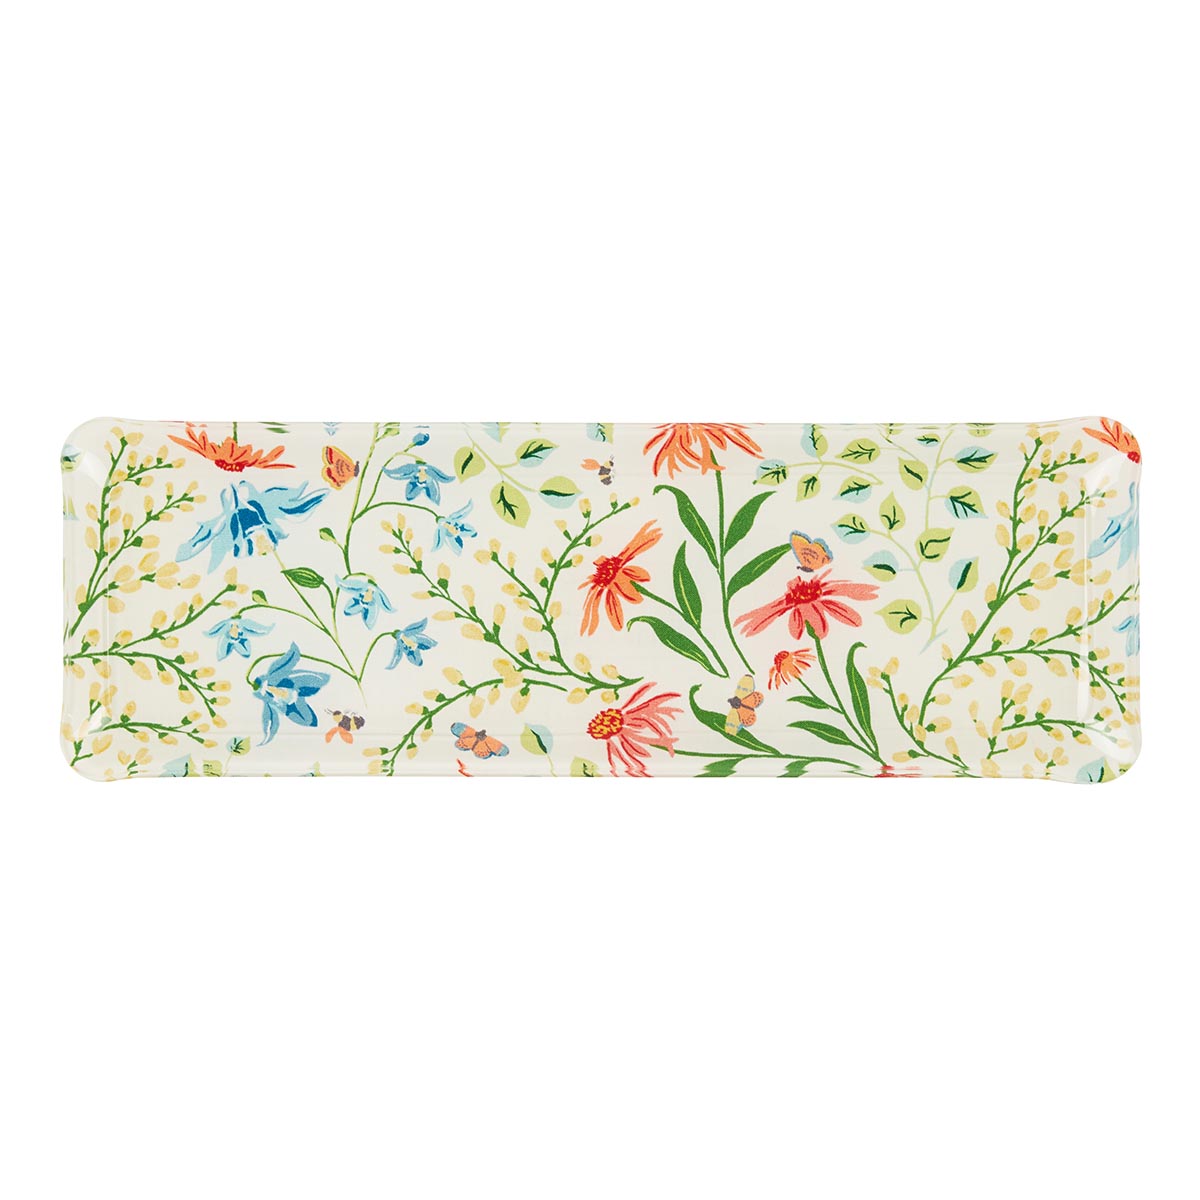 Nina Campbell Fabric Tray Oblong - Multi Floral